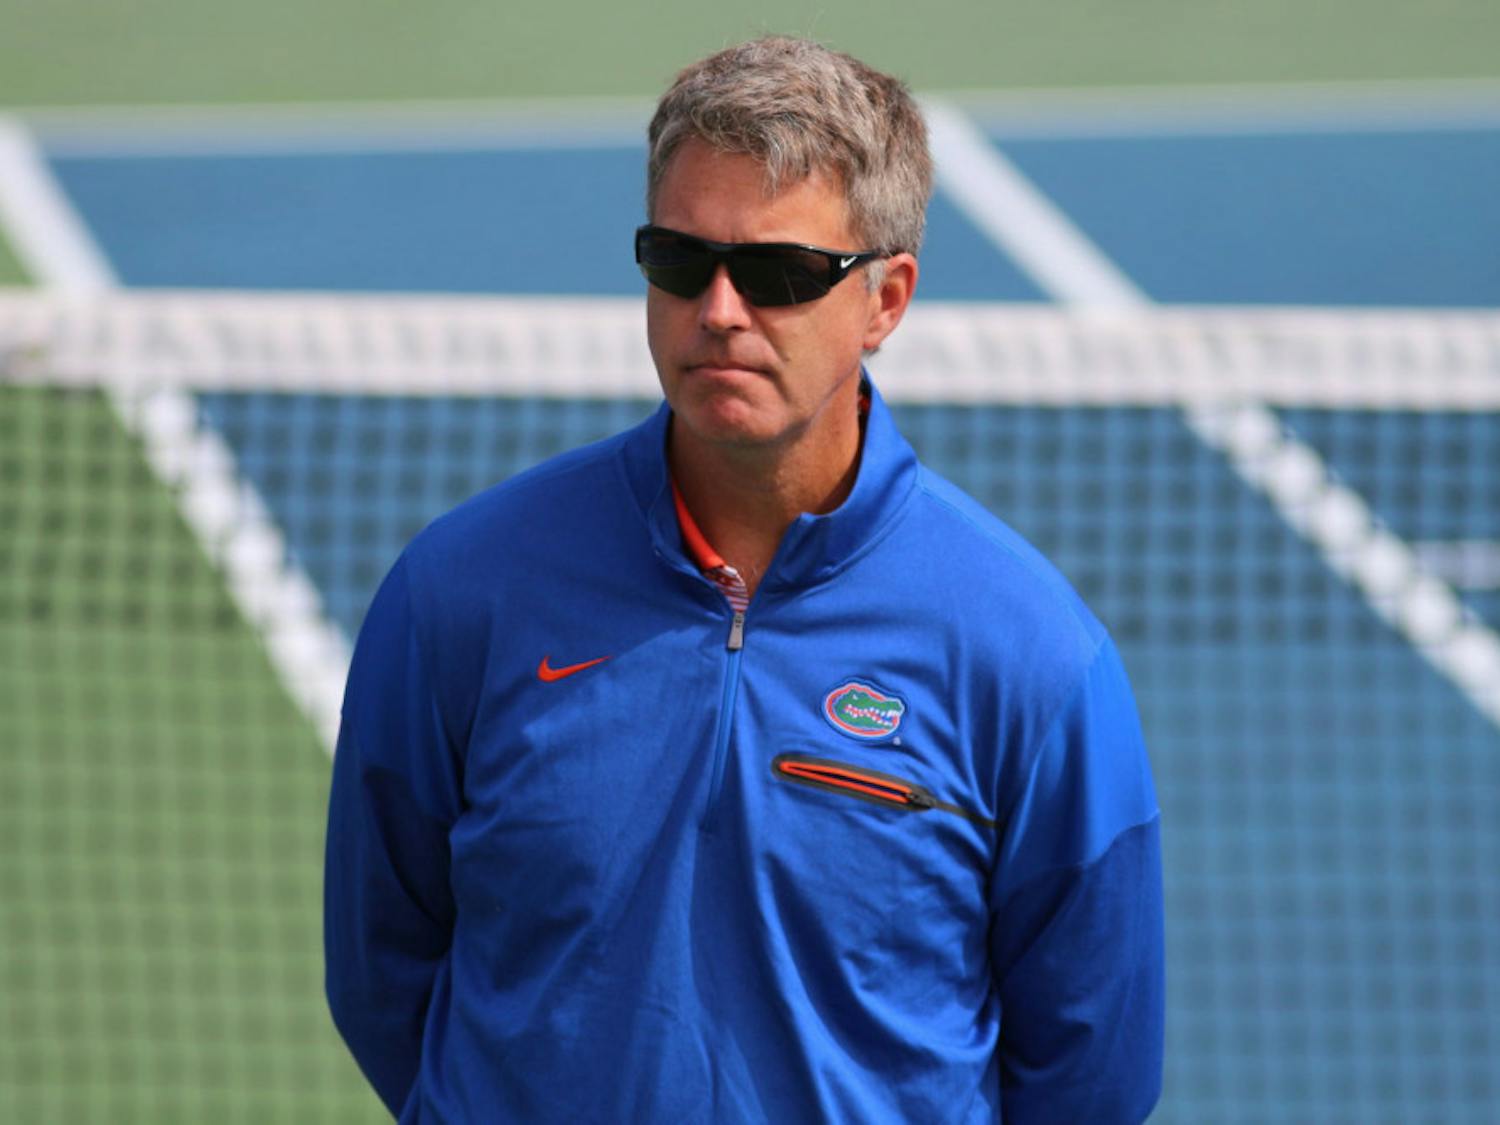 UF women's tennis coach Roland Thornqvist: I think we have a lot of talent. On some courts we have more talent than we know what to do with.